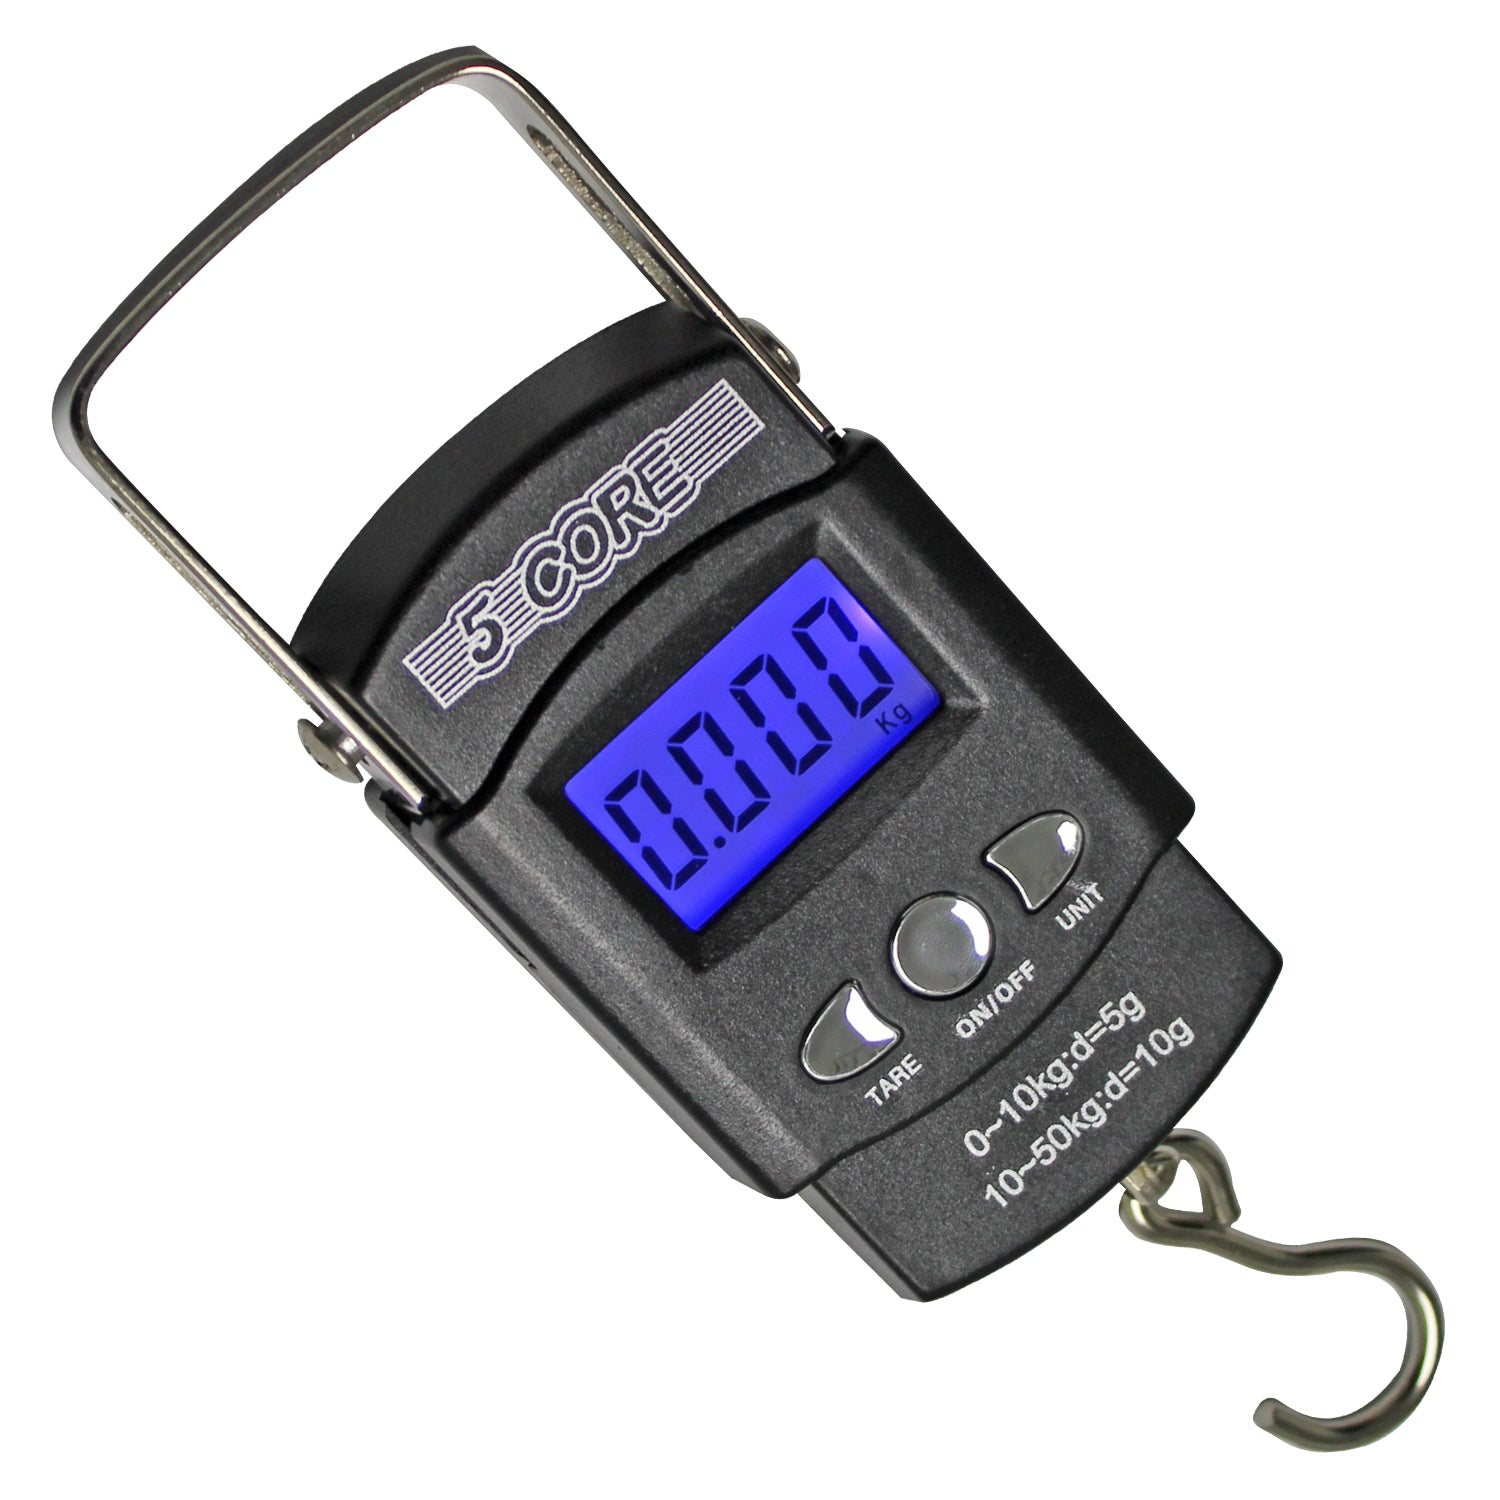 5 Core Fishing Gear And Equipment Luggage Scale 110lb Battery Operated W Lcd Built-in Measuring Tape All Weather Ice Fishing Gear Multipurpose -LS-006